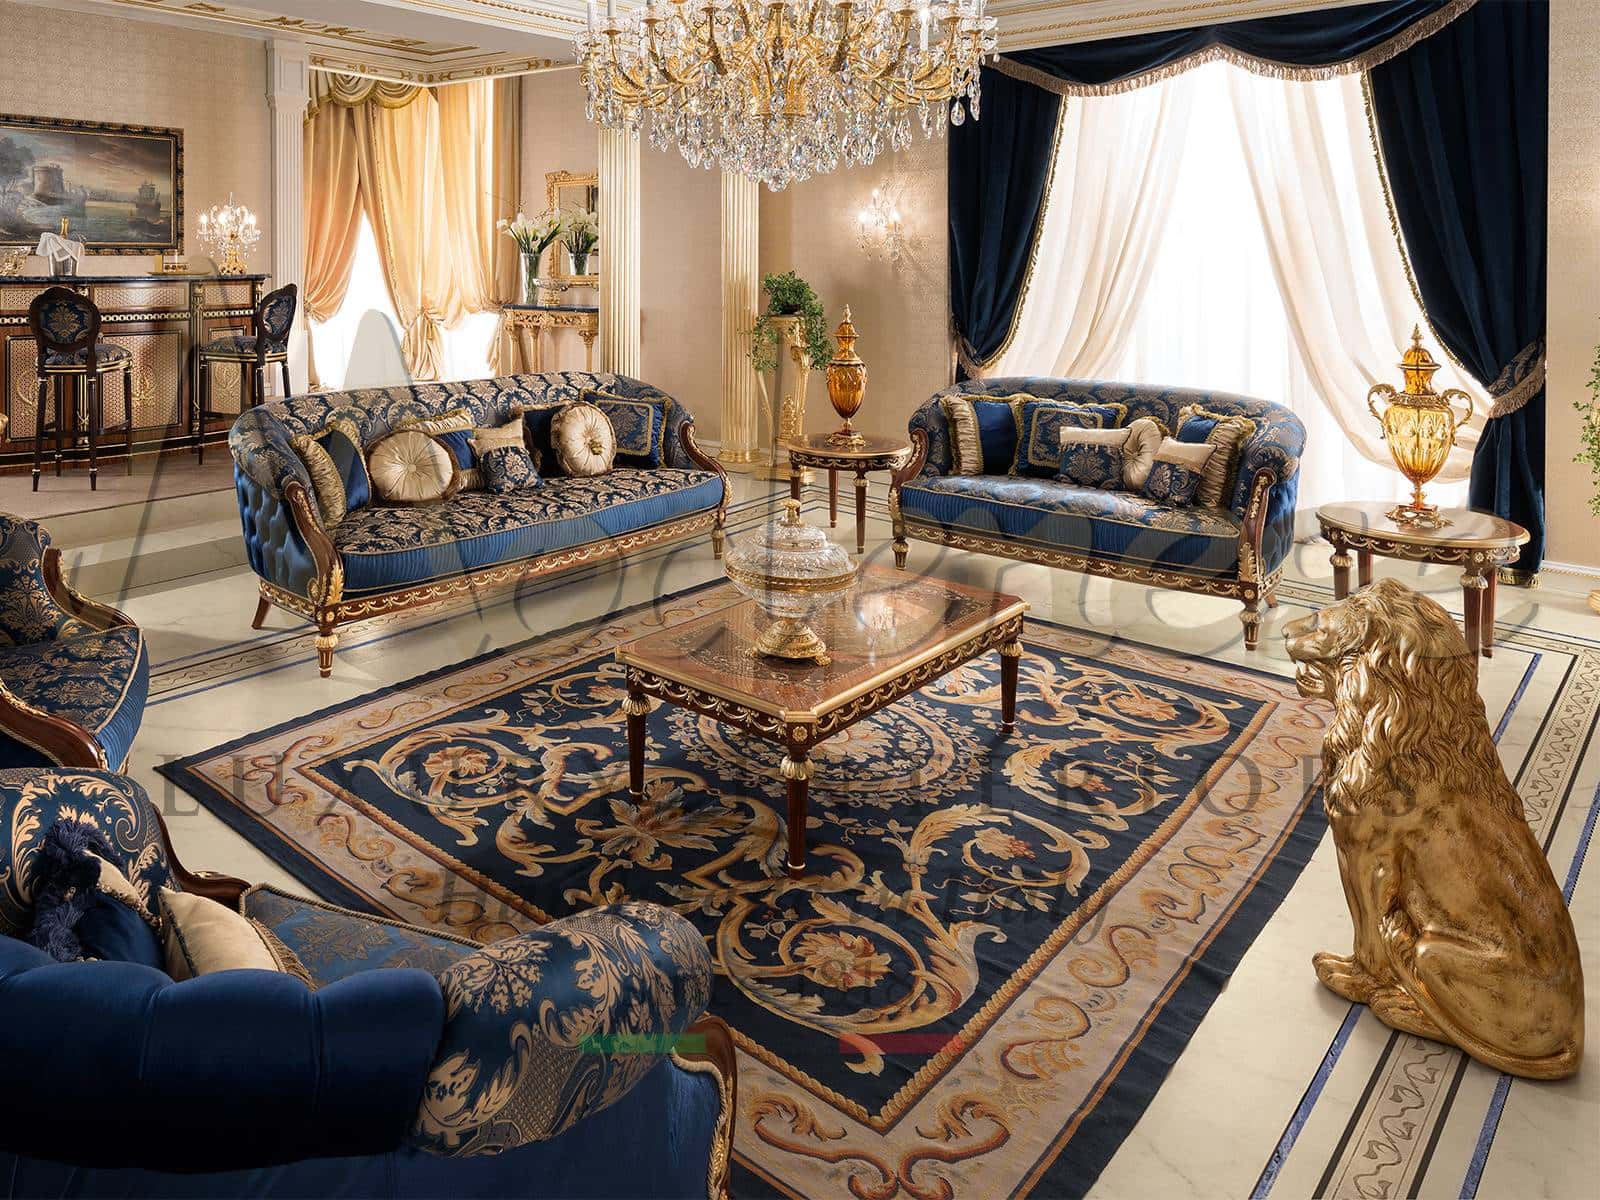 original elegant classic handcrafted carpet design home decoration royal project unique timeless italian french style residential project baroque refined majlis living room design luxury rugs ideas interior design service consultant